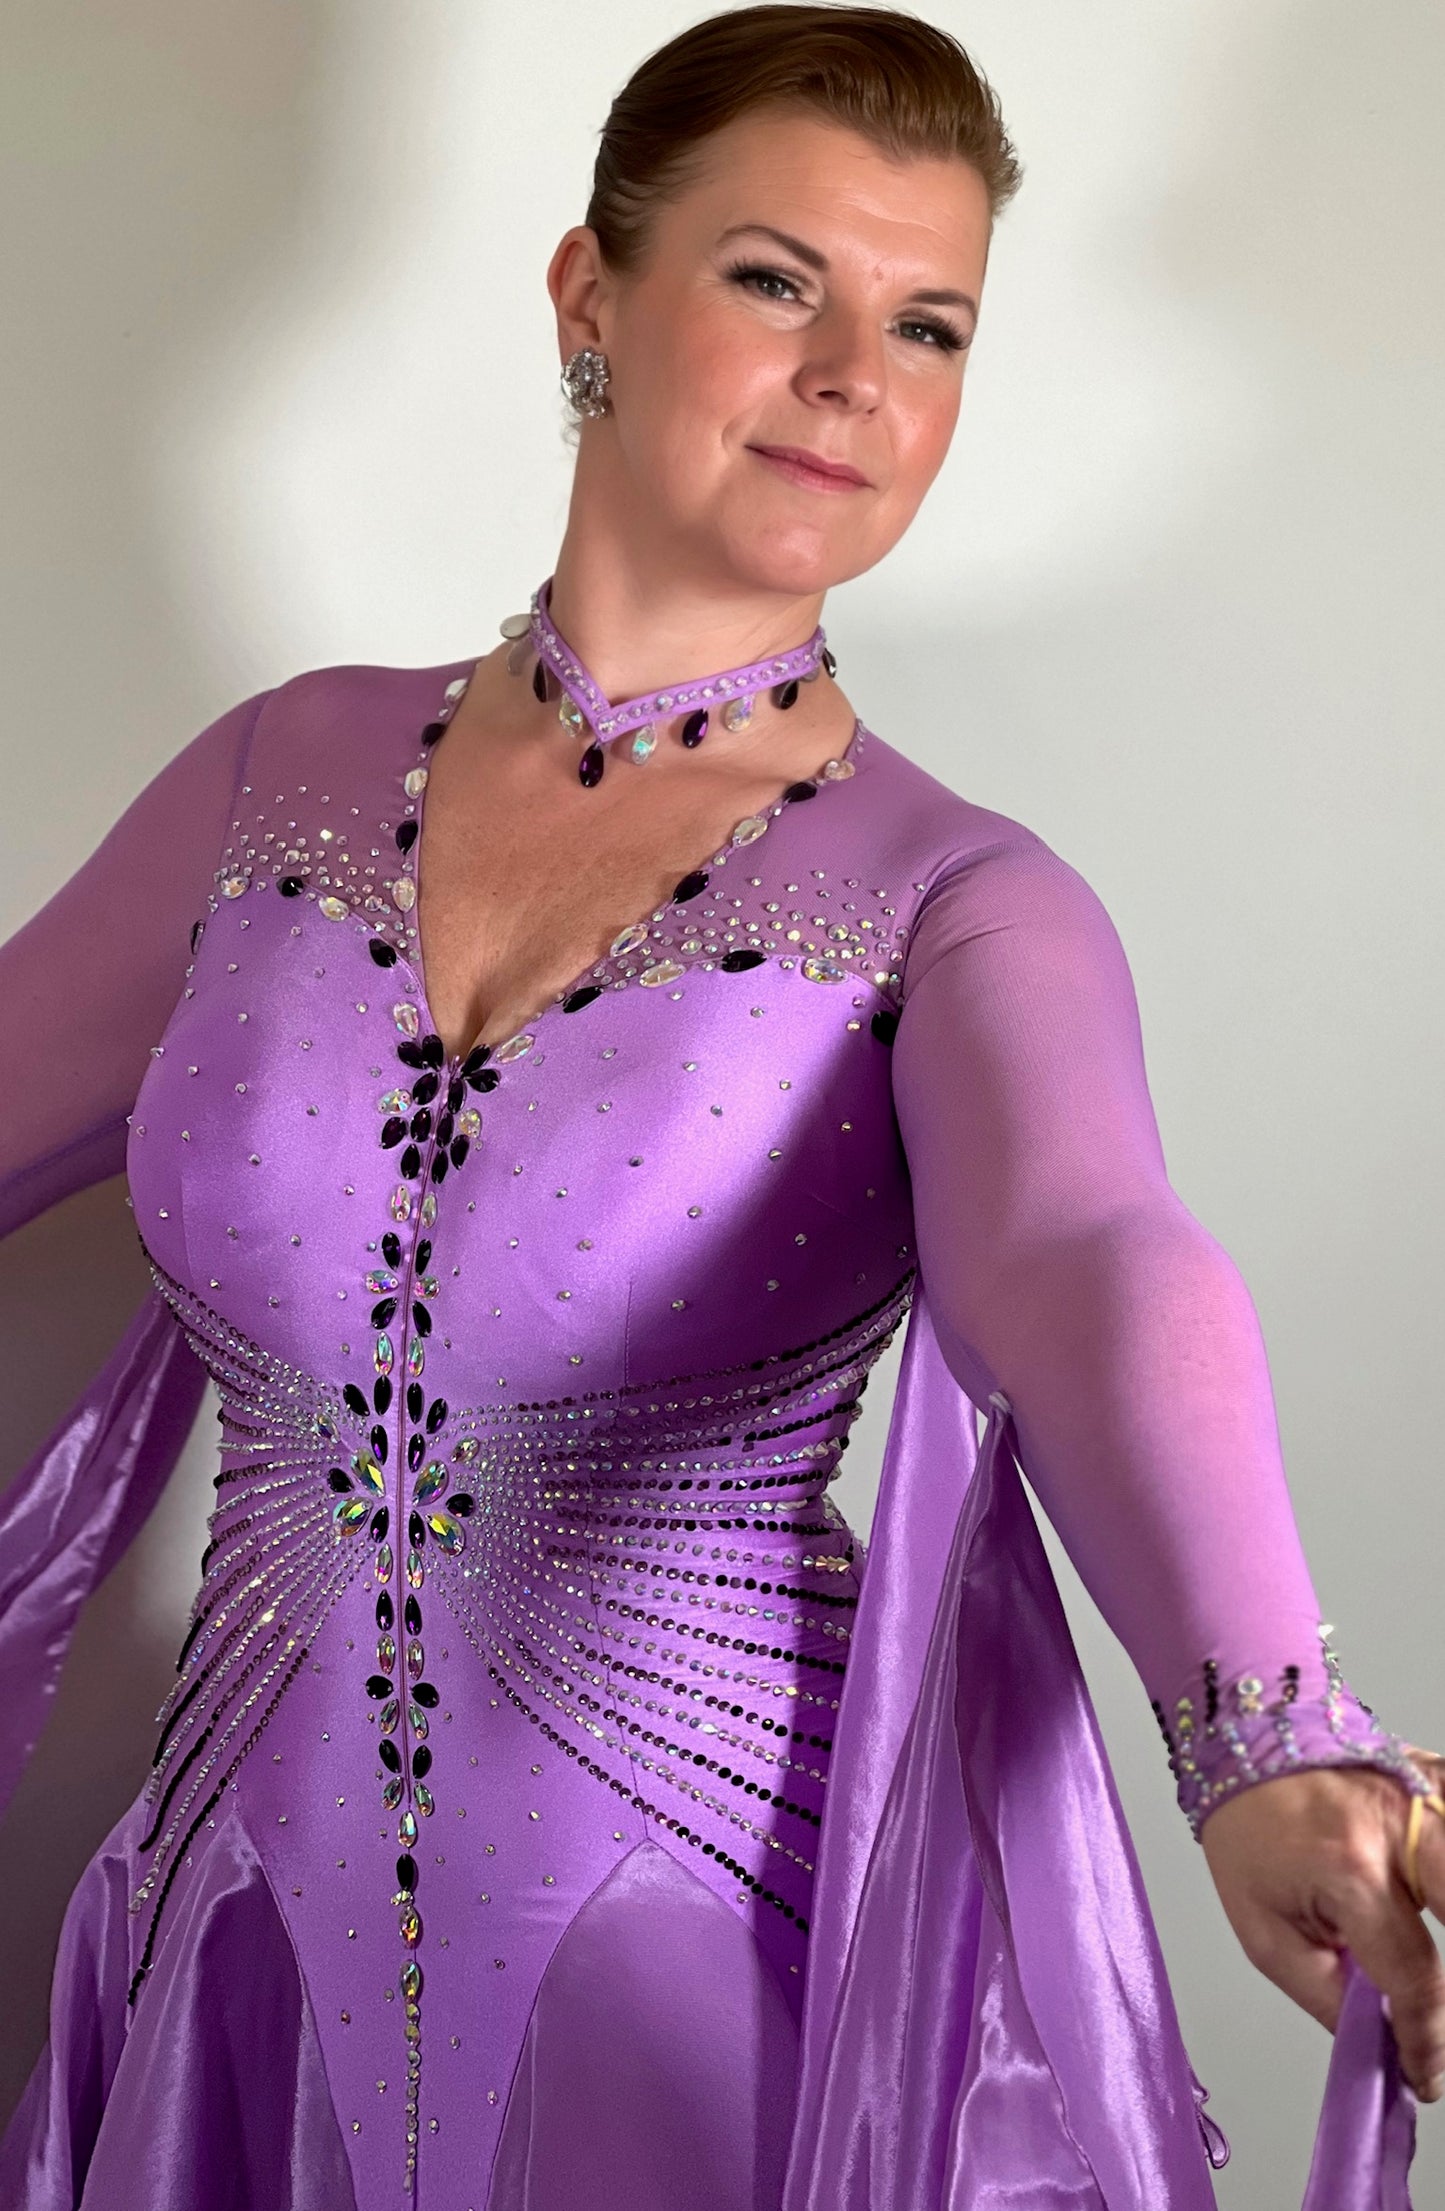 057 Lilac Dream Competition Ballroom Dance Dress. Comes with Detachable floats. High mesh on flesh Lycra back. Stoned in Purple velvet and AB